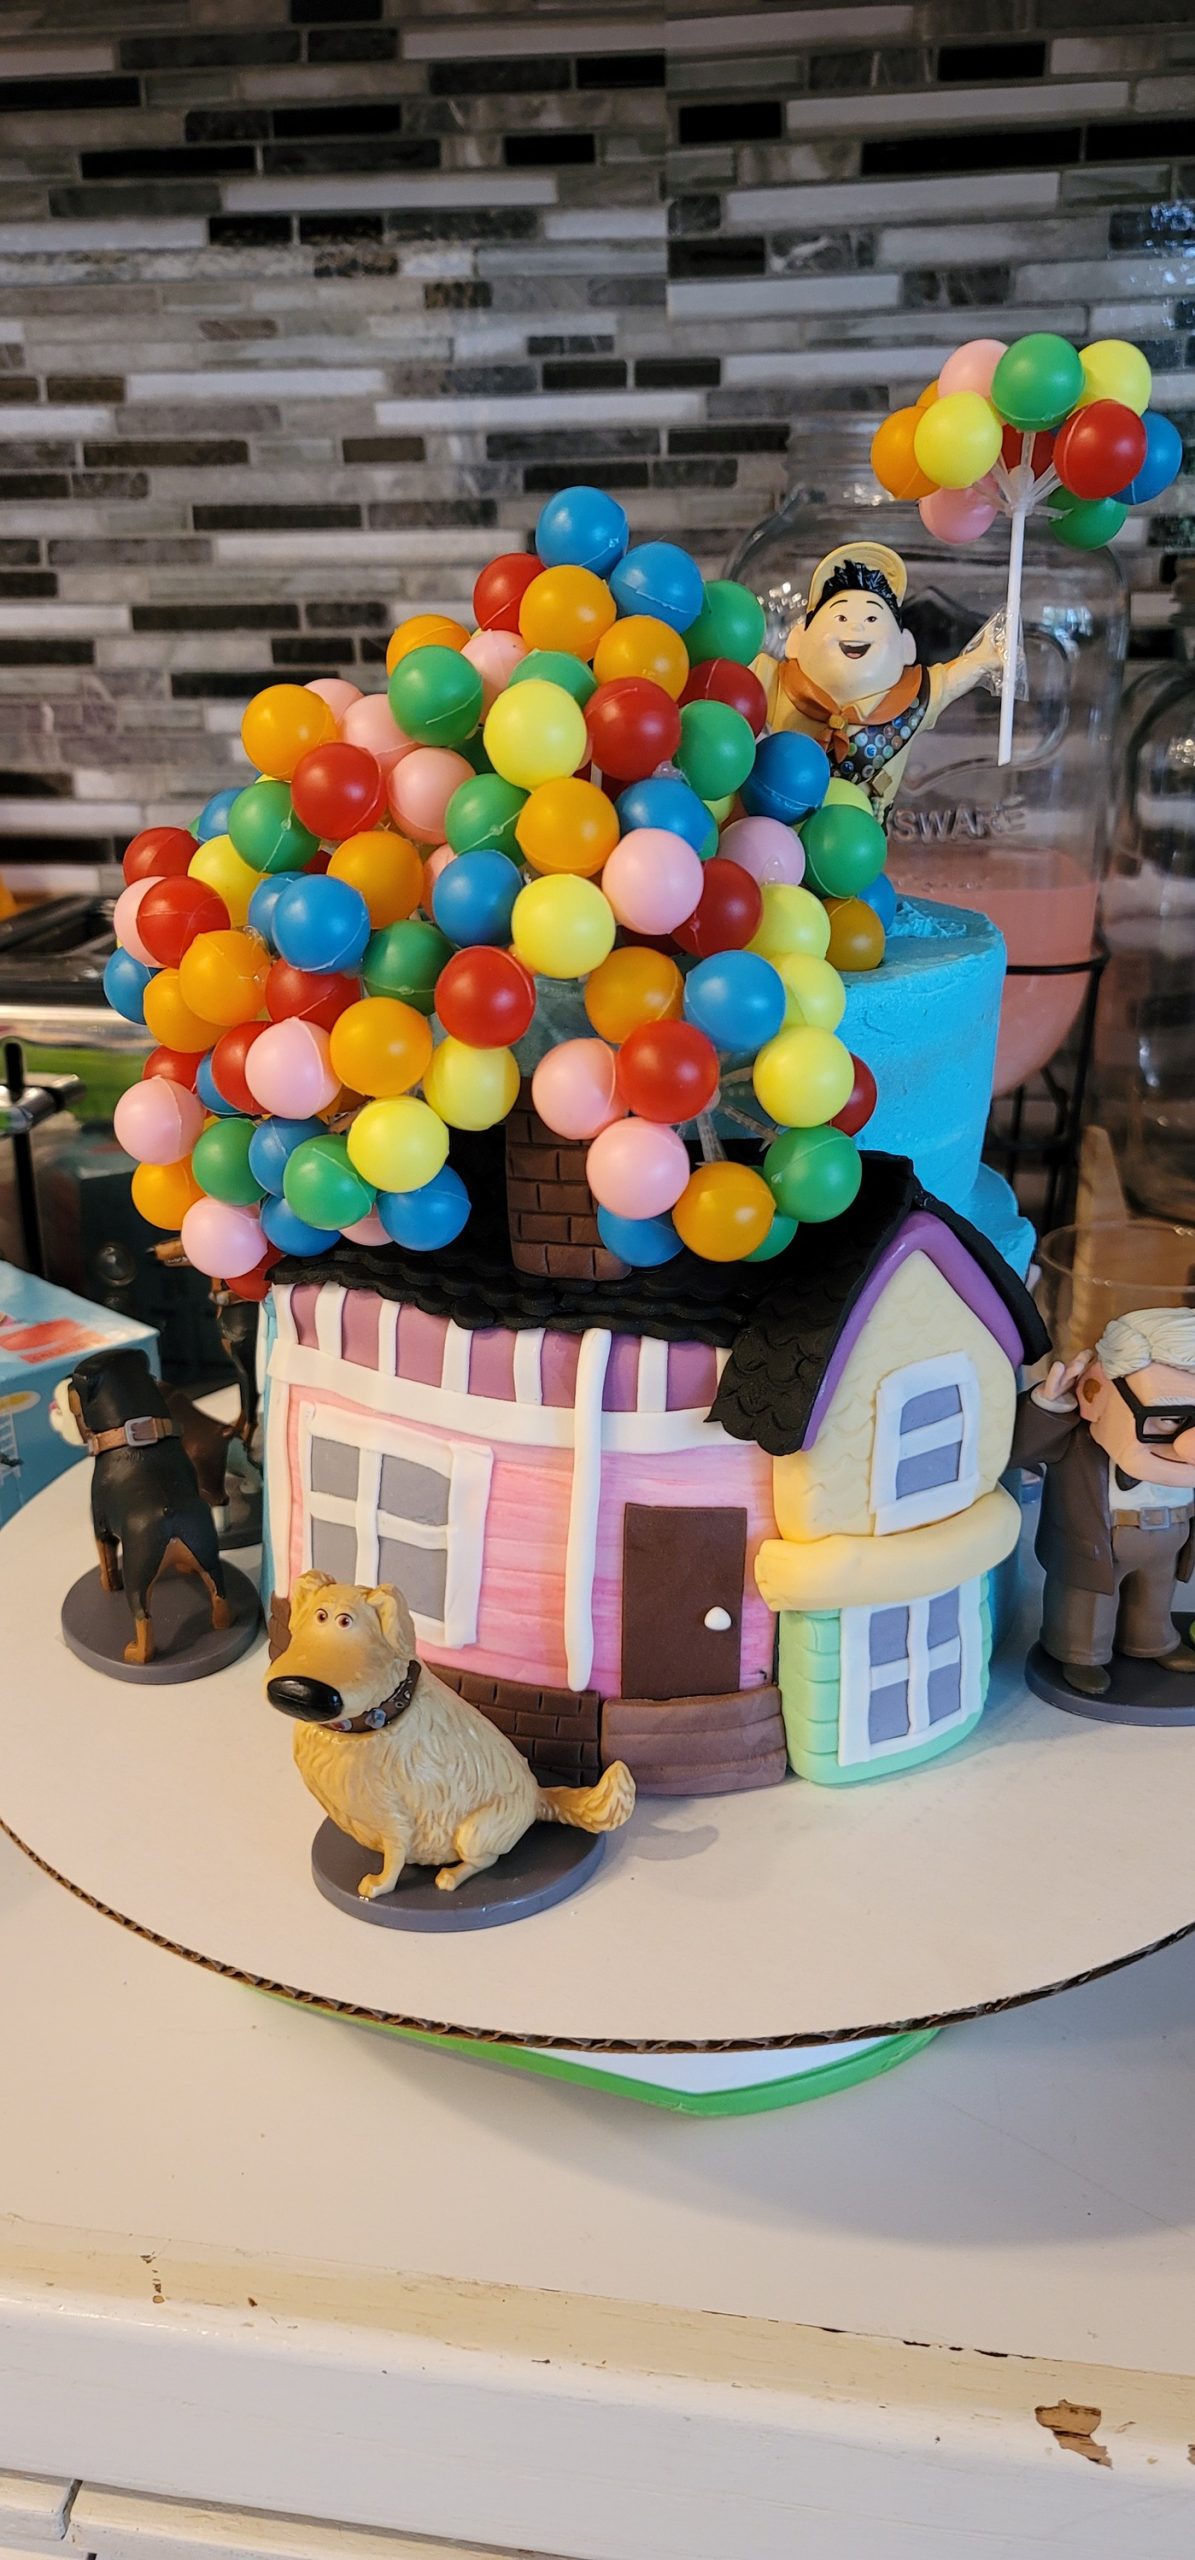 Custom cake with a house and balloons on it. Made by Nan's Nummies